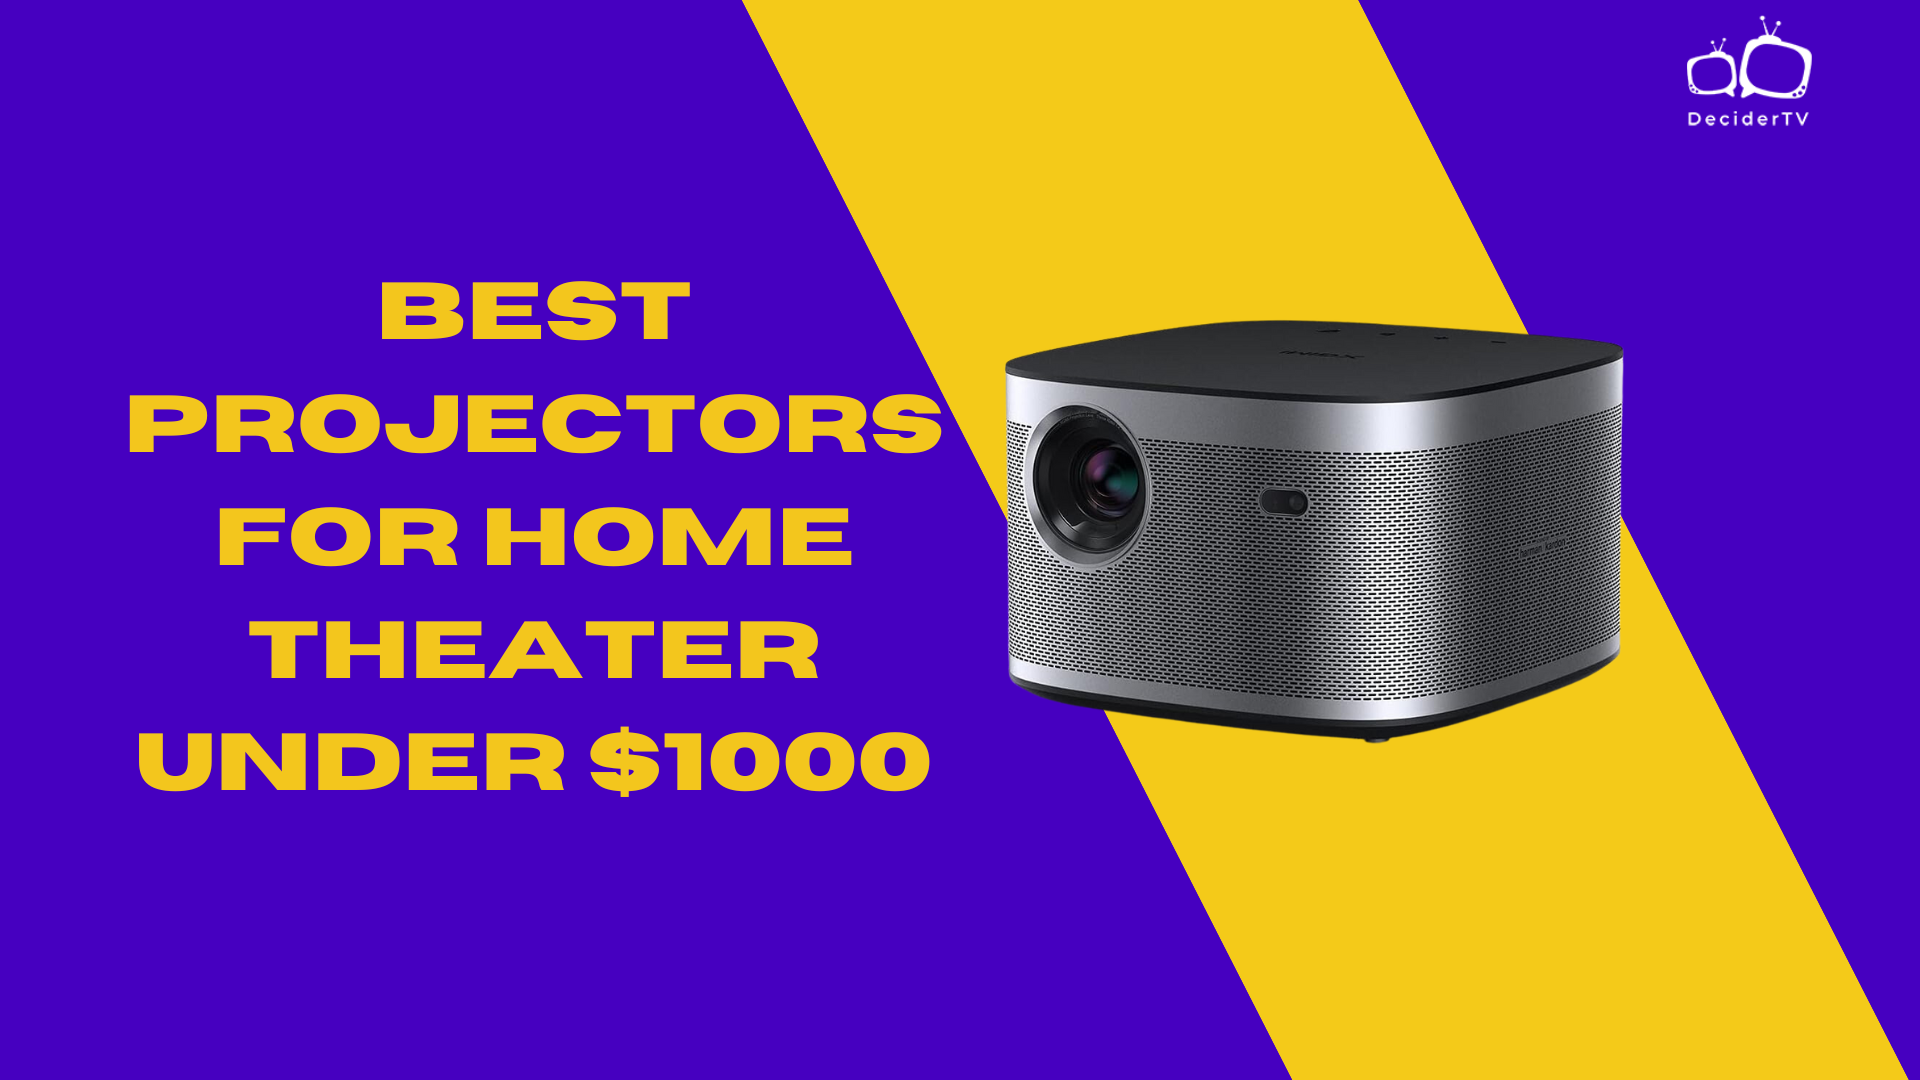 Best Projectors for Home Theater Under $1000